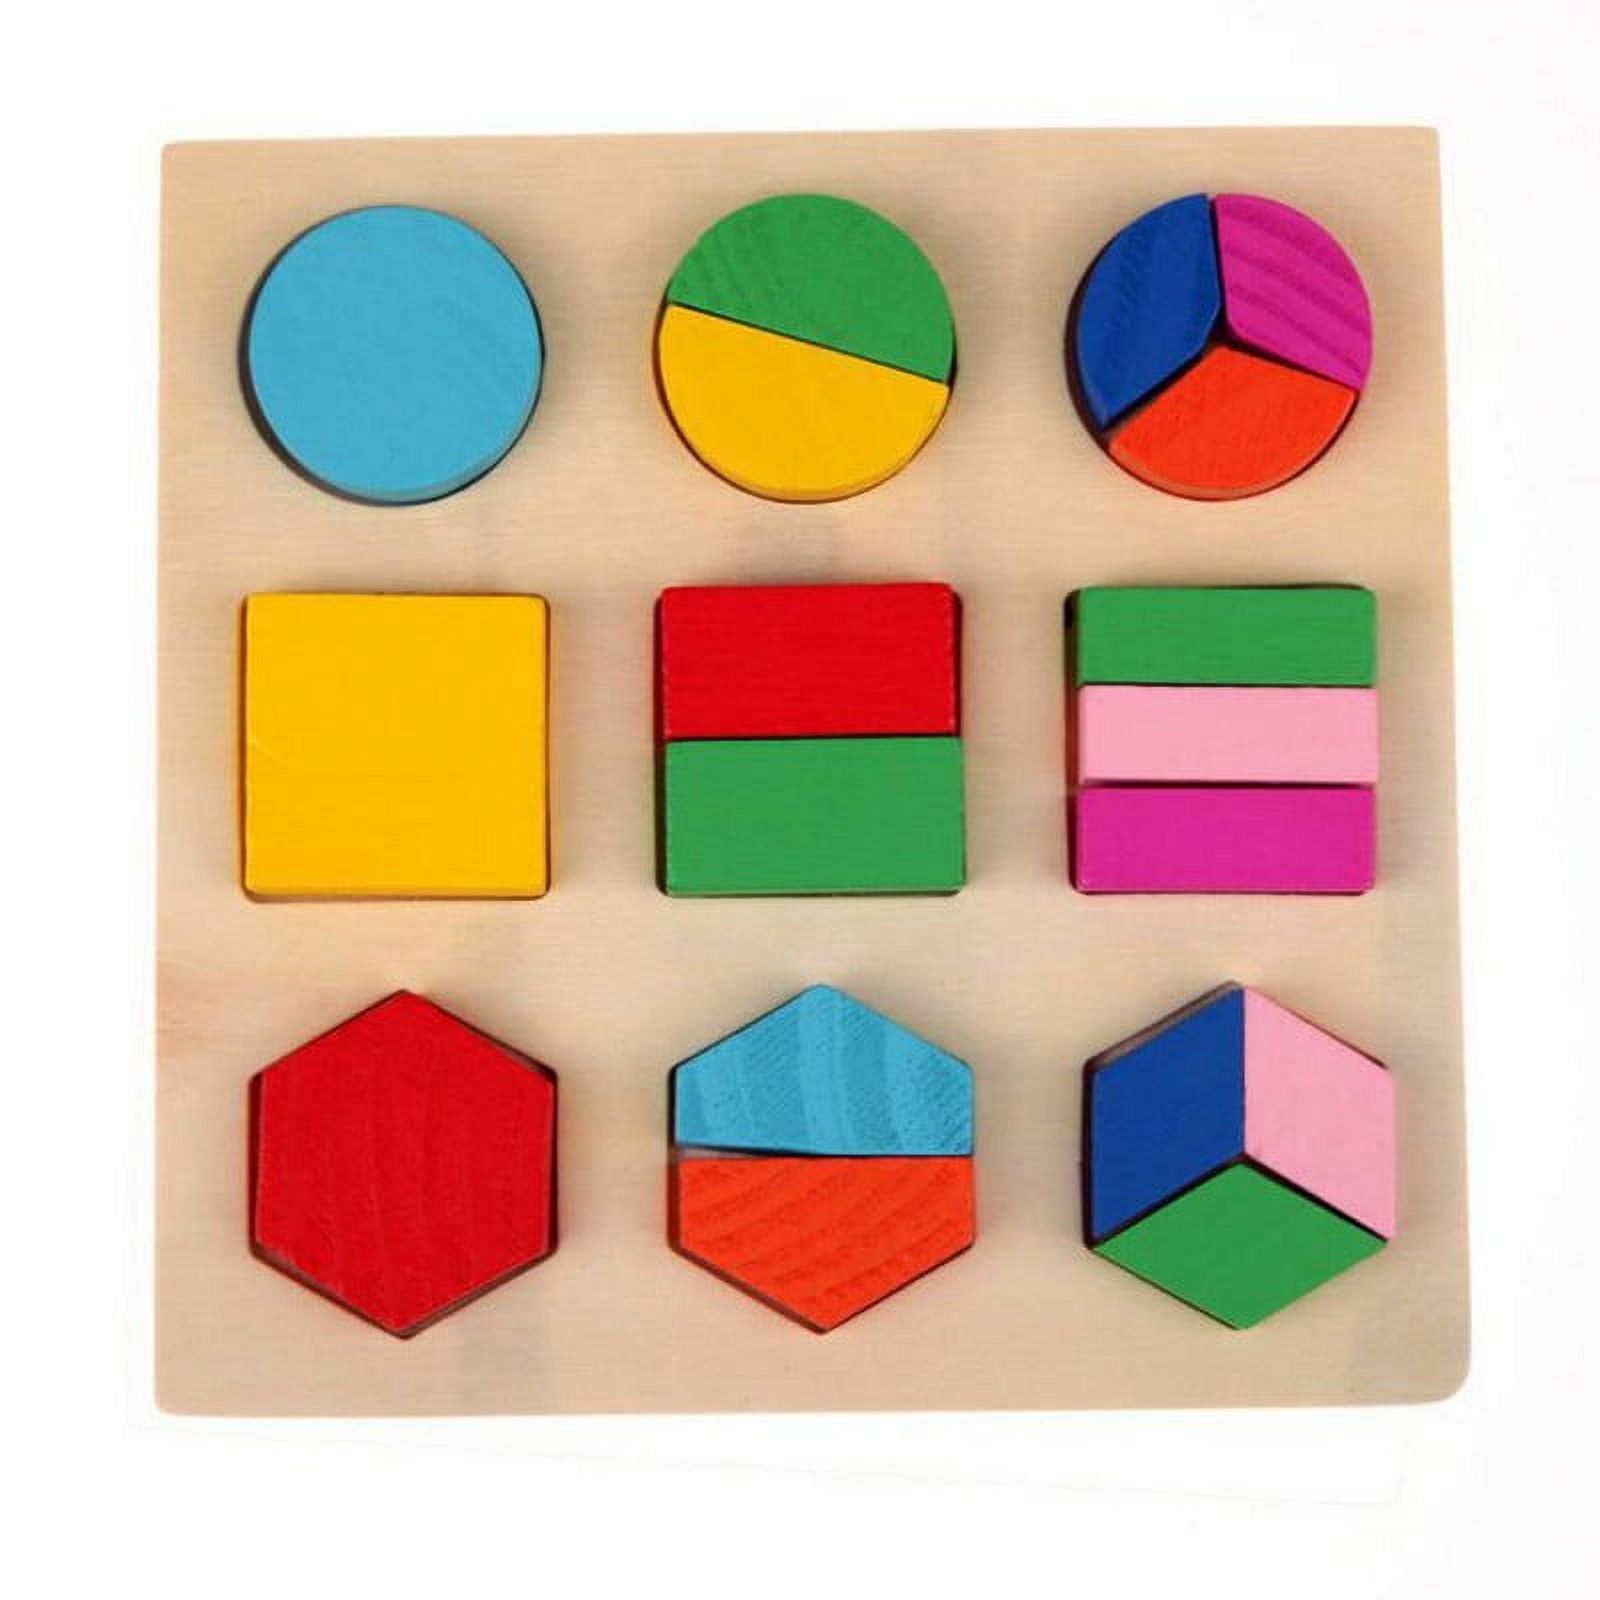 Kids Baby Wooden Geometry Block Puzzle Montessori Early Learning Educational Toy - image 1 of 5